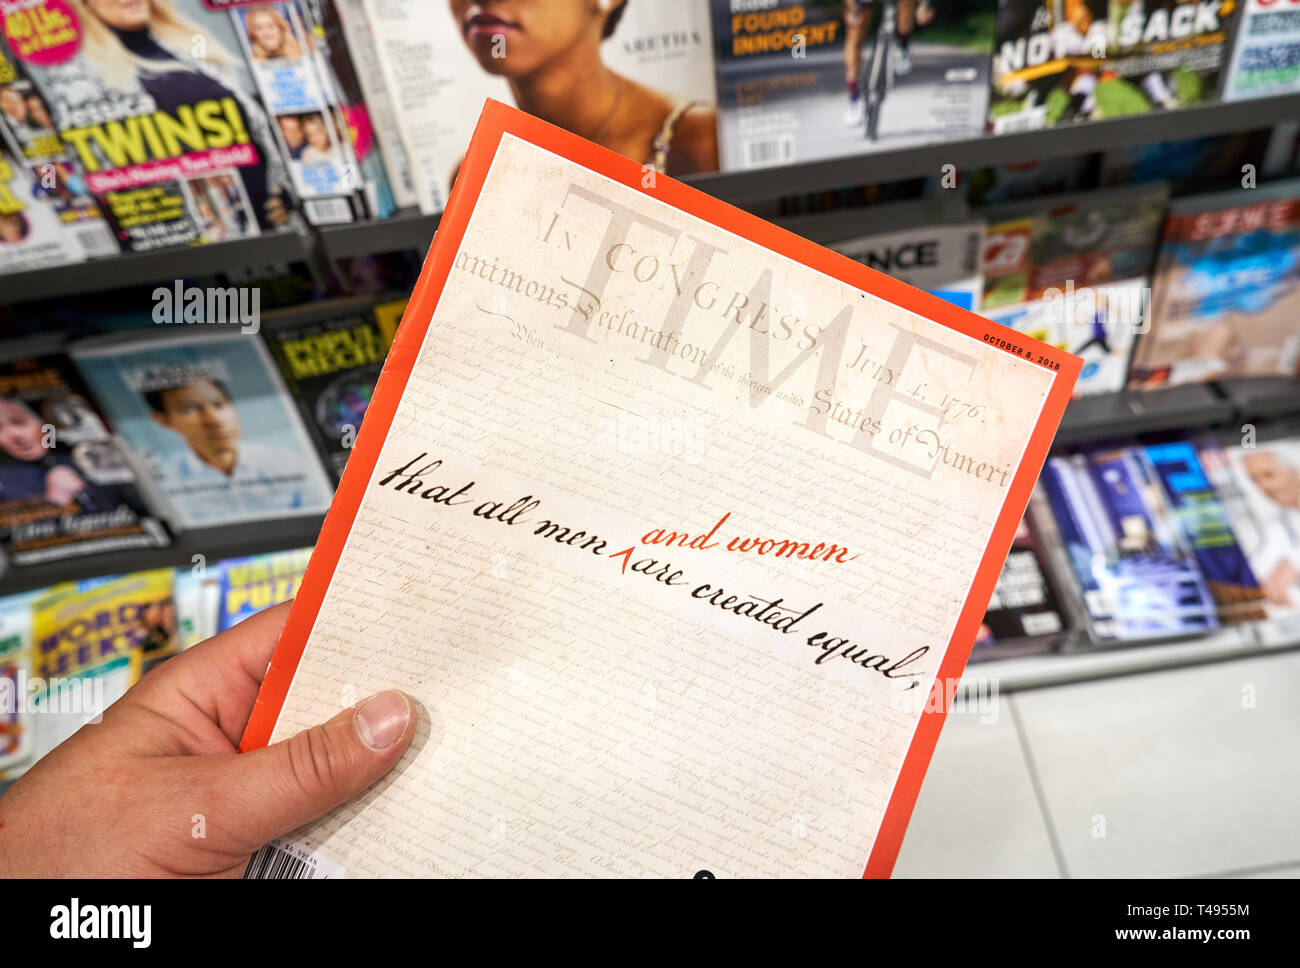 MONTREAL, CANADA - OCTOBER 9, 2018: Time magazine with The United States Declaration of Independence on the front cover in a hand over a stack of maga Stock Photo